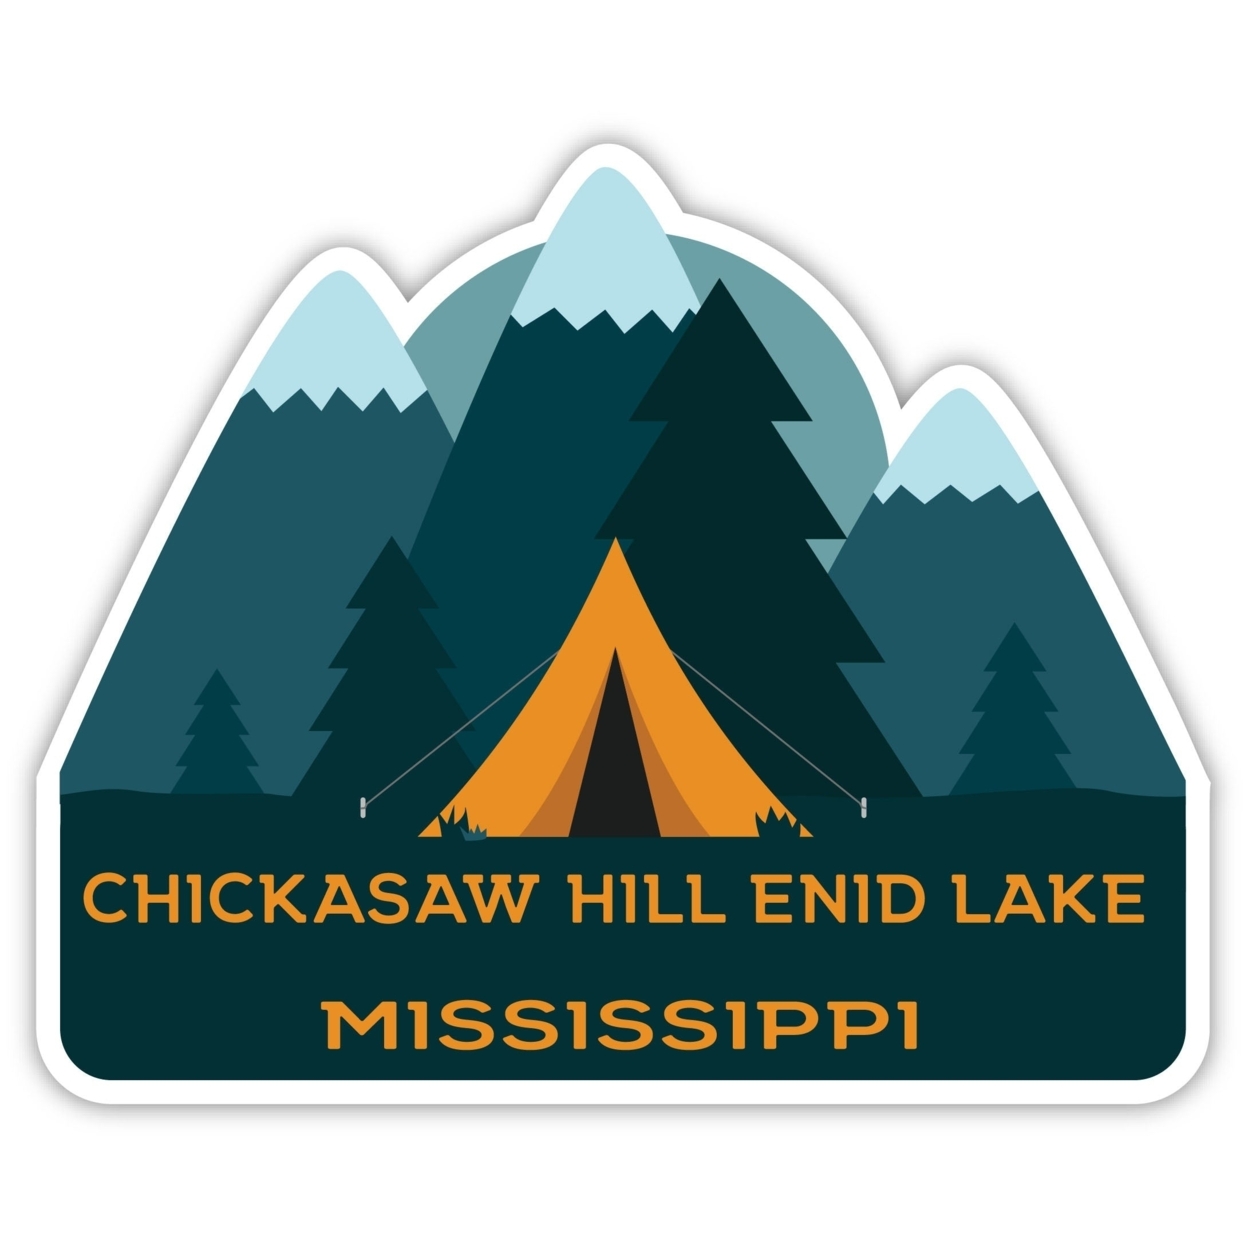 Chickasaw Hill Enid Lake Mississippi Souvenir Decorative Stickers (Choose Theme And Size) - Single Unit, 10-Inch, Tent